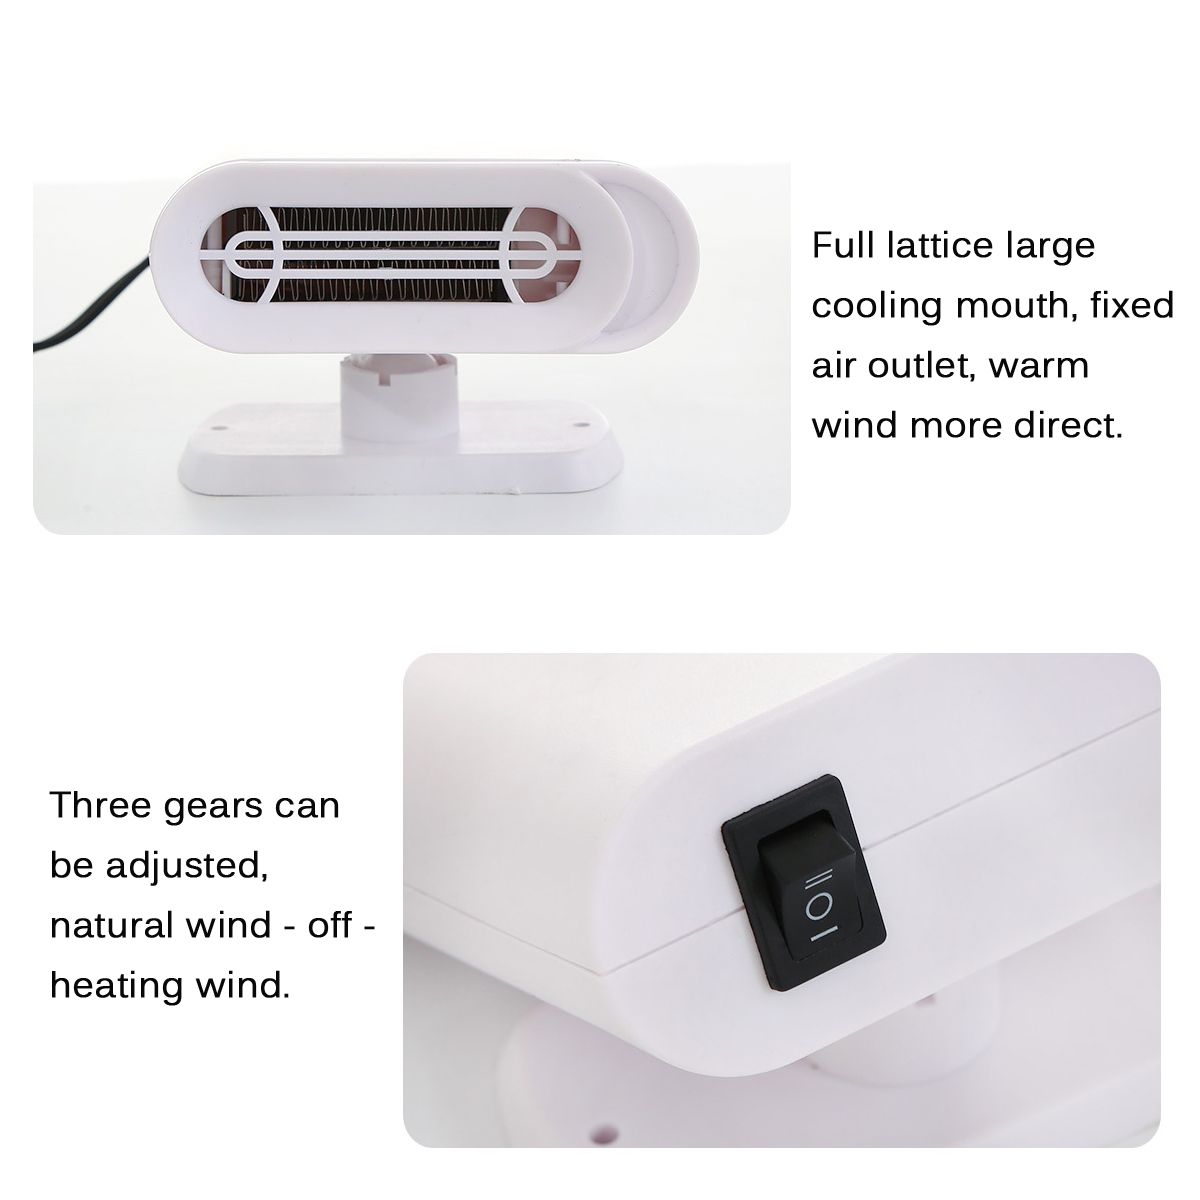 Air-Purification-Heating-2-in-1-150W-12V-24V-Car-Heater-1612064